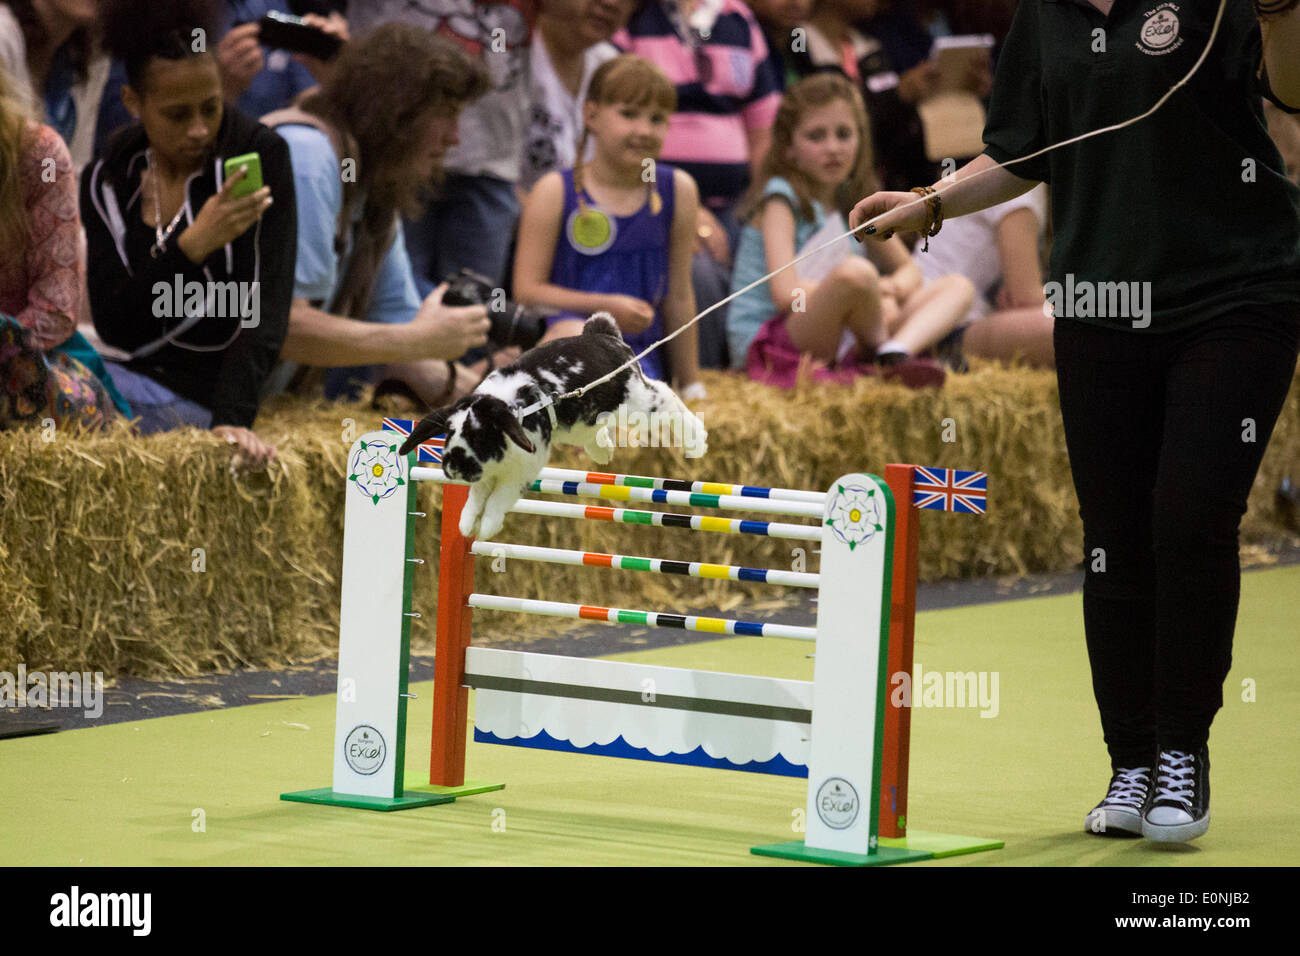 London, UK. 17 May 2014. A rabbit jumps over a tall fence. The London Pet Show, now in its 4th year, takes place on 17-18 May 2014 at Earl's Court with pets such as reptiles, rabbits, ducks, cats, dogs and ponies on show. Photo: Nick Savage/Alamy Live News Stock Photo